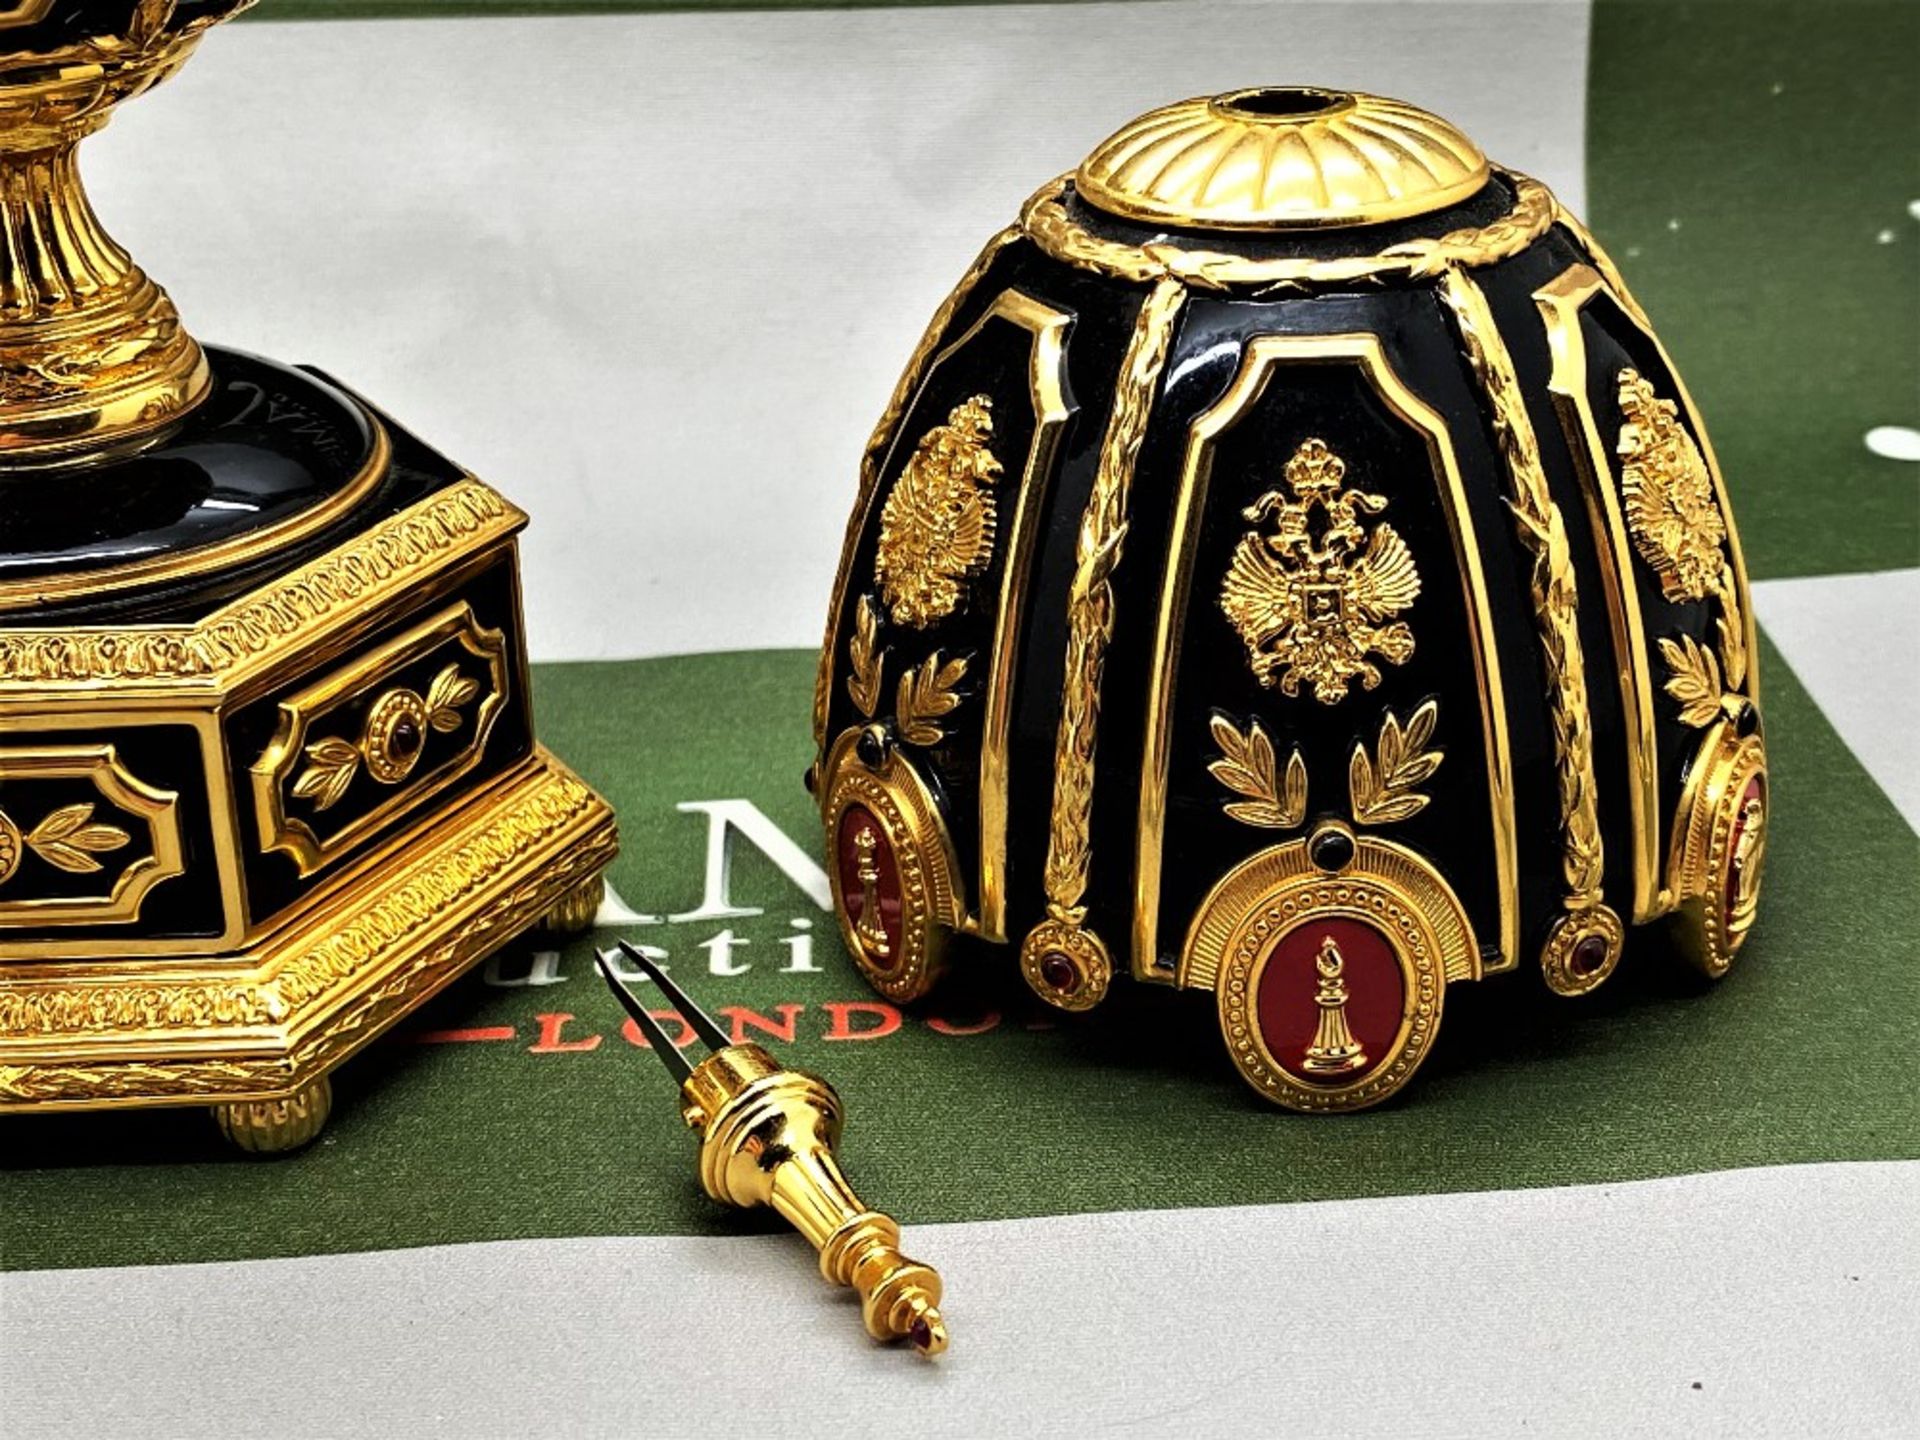 Faberge 24 Ct Gold "The Imperial Jeweled Egg Chess Set" - Image 6 of 6